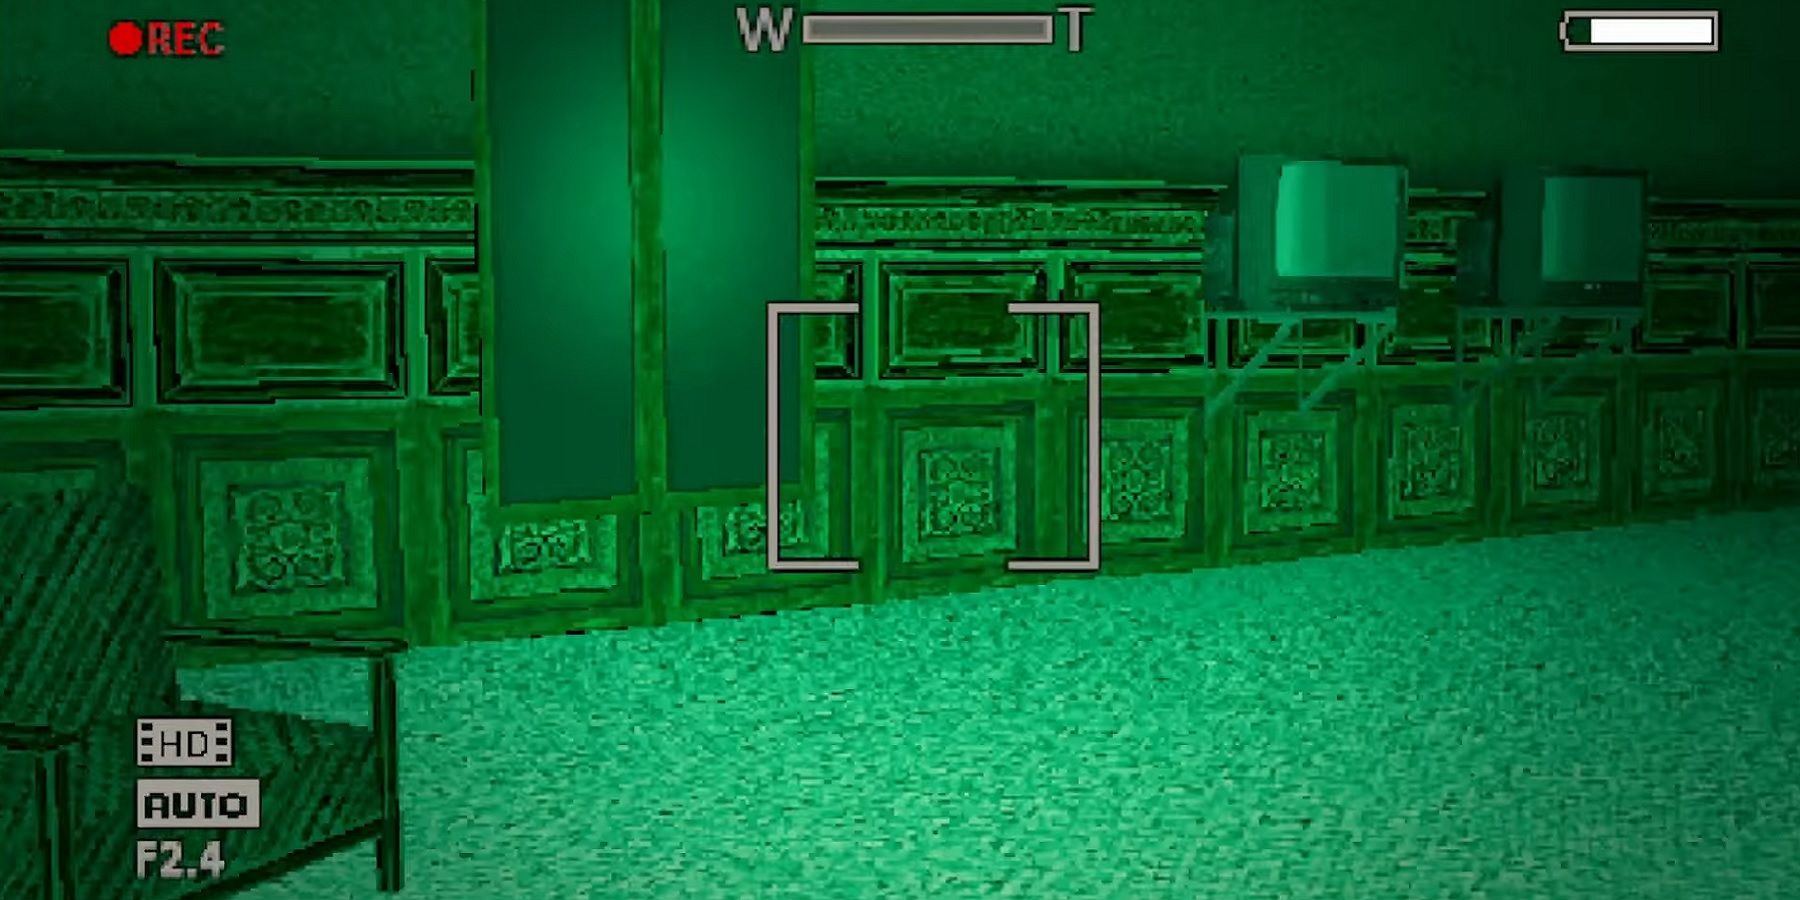 A PS1-style image showing Outlast's nightvision visuals in a pixilated form.